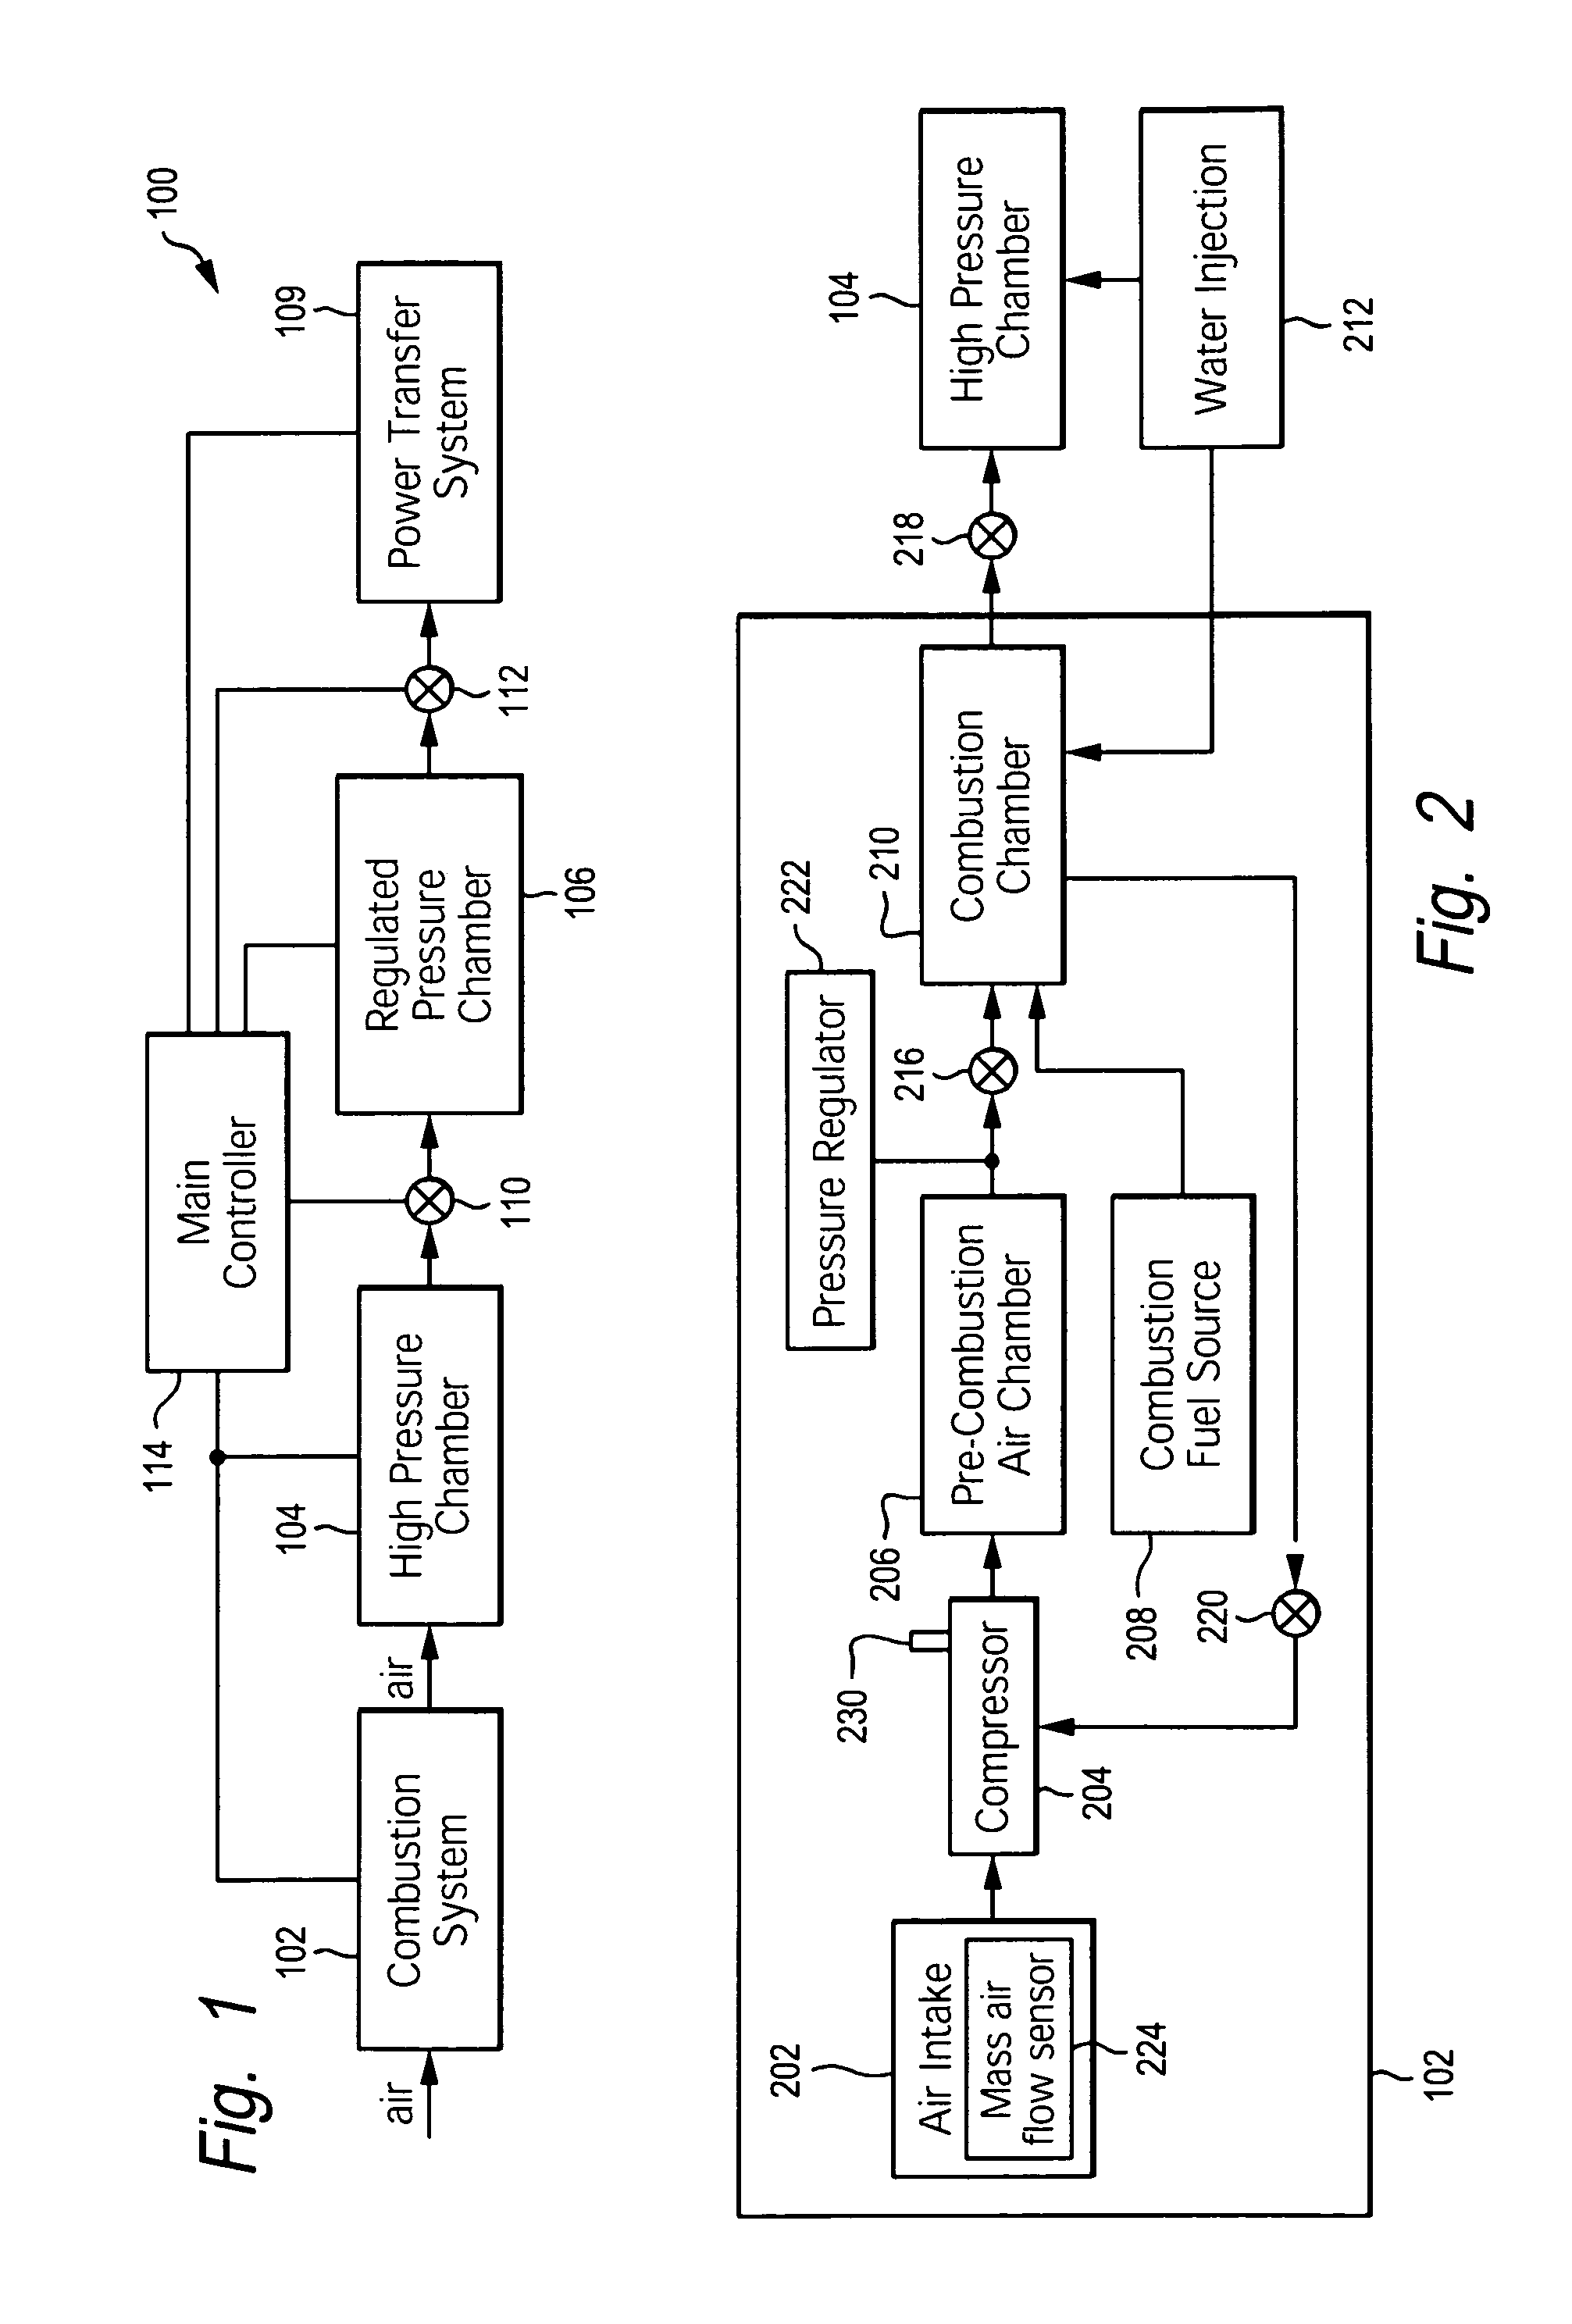 Asynchronous combustion system